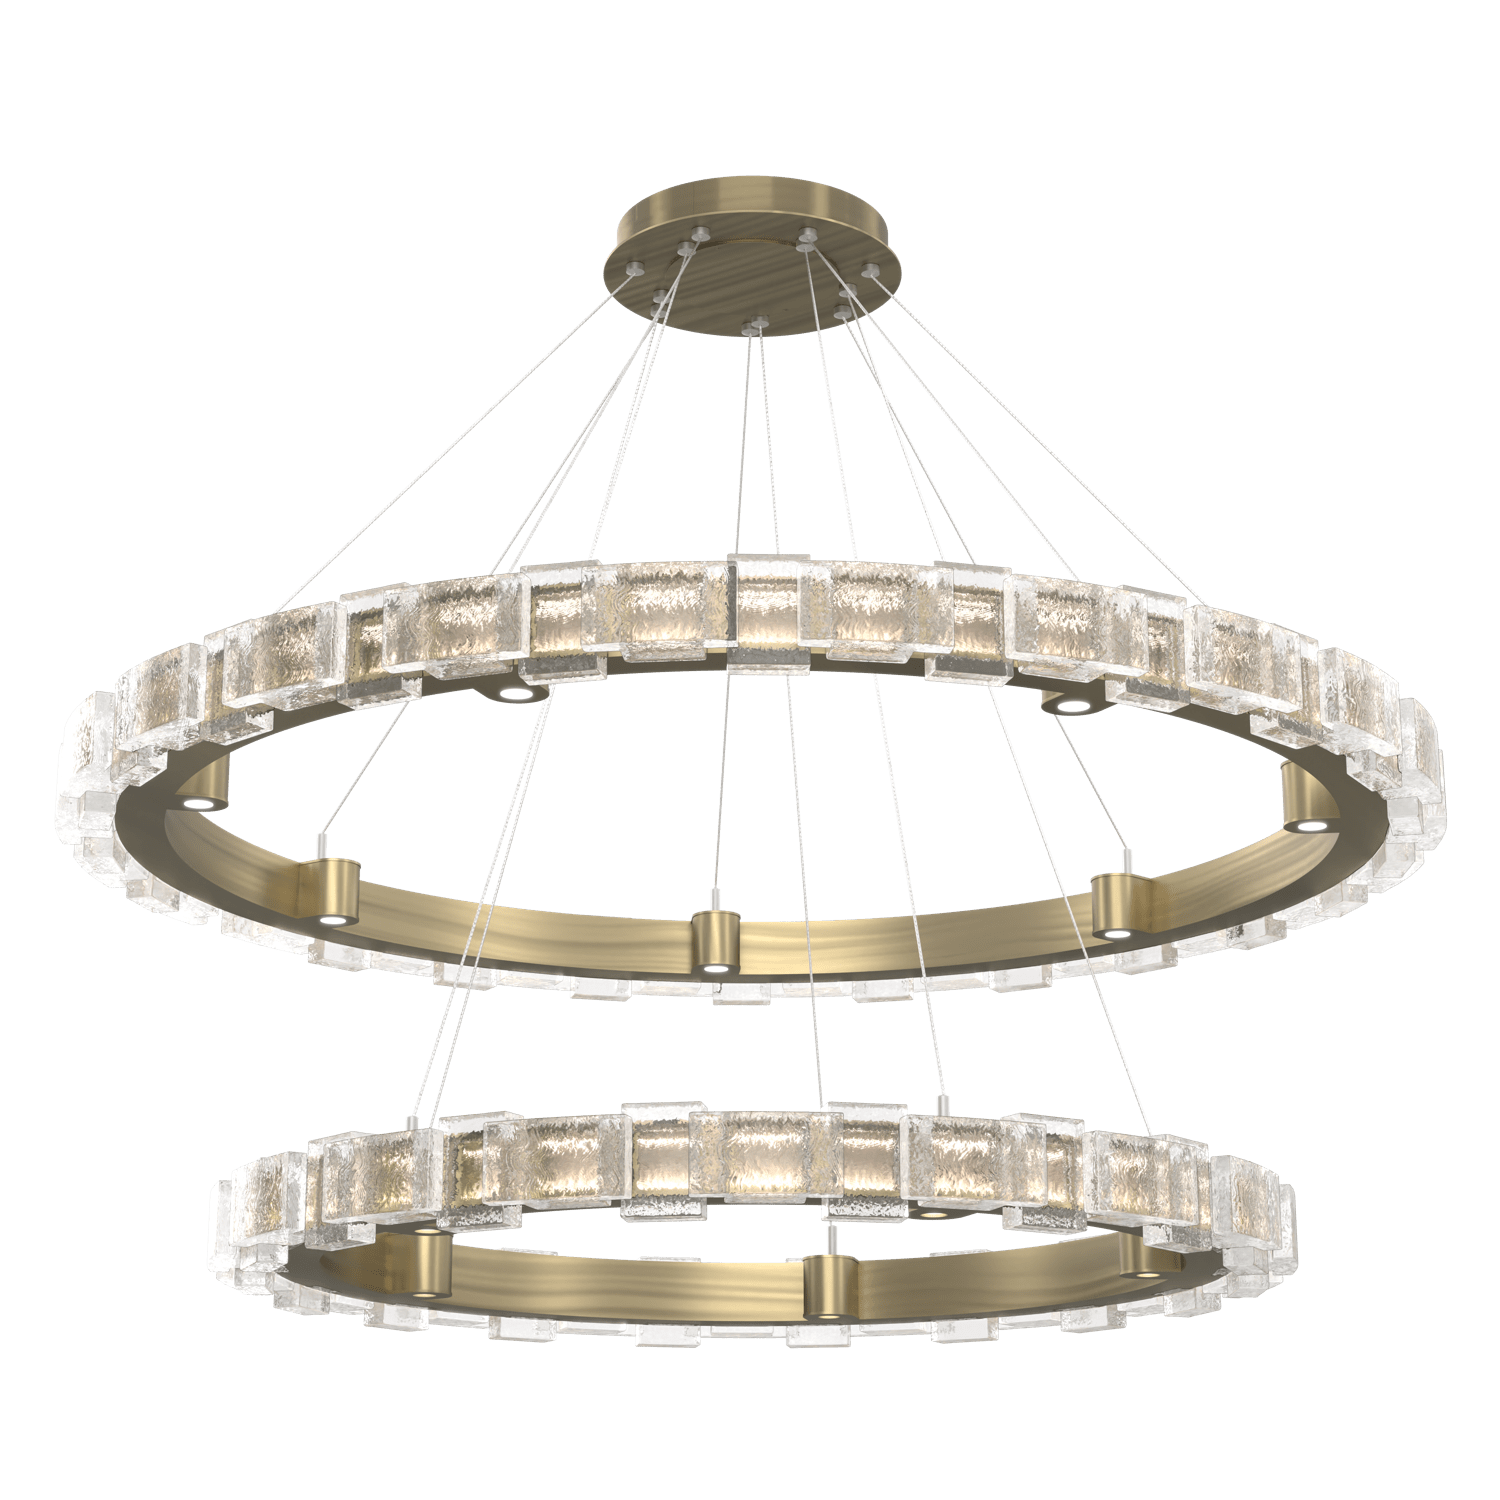 CHB0087-2T-HB-TE-Hammerton-Studio-Tessera-50-inch-two-tier-ring-chandelier-with-heritage-brass-finish-and-clear-tetro-cast-glass-shade-and-LED-lamping